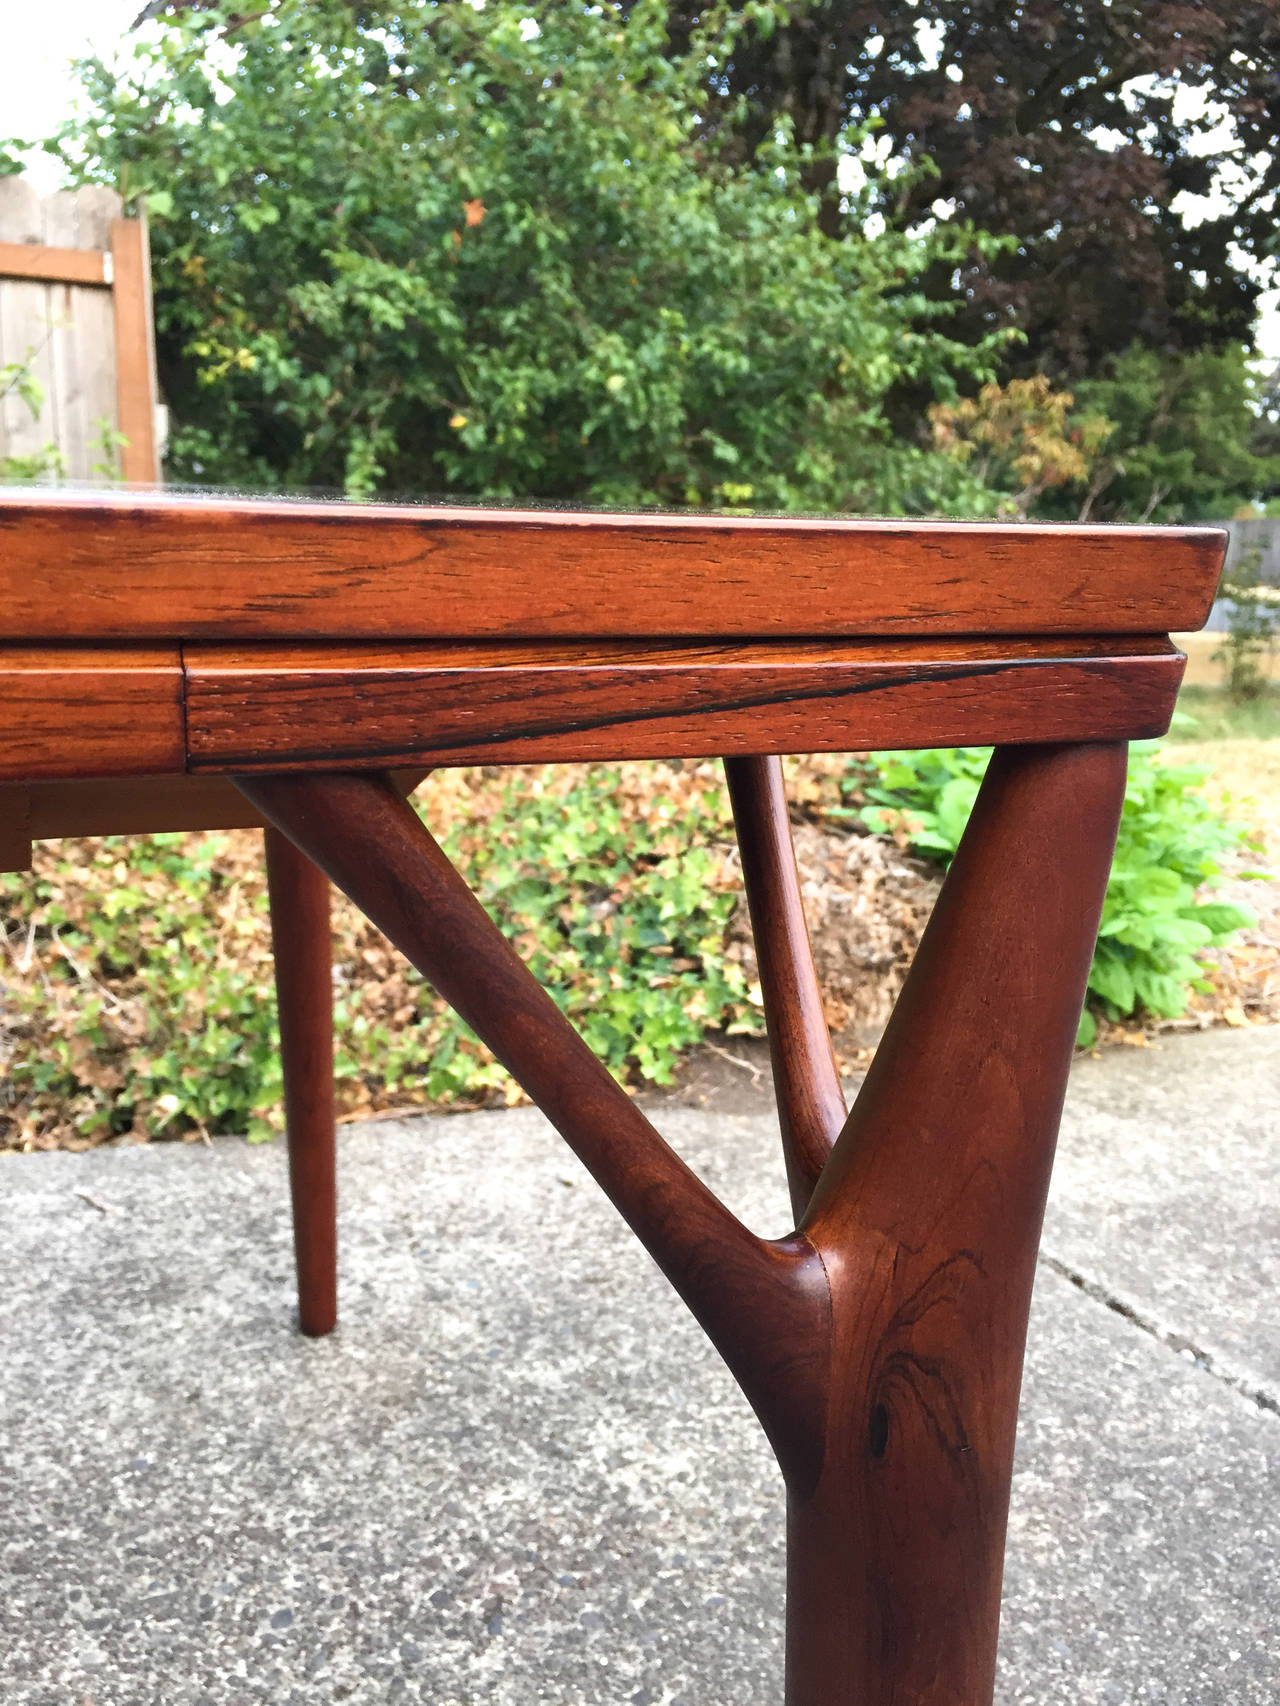 Amazing rosewood dining table designed by Helge Vestergaard Jensen c.1960s. Beautiful sculptural lines with dramatic rosewood grain. Table does have one leaf. Measurements with leaf: 93.5